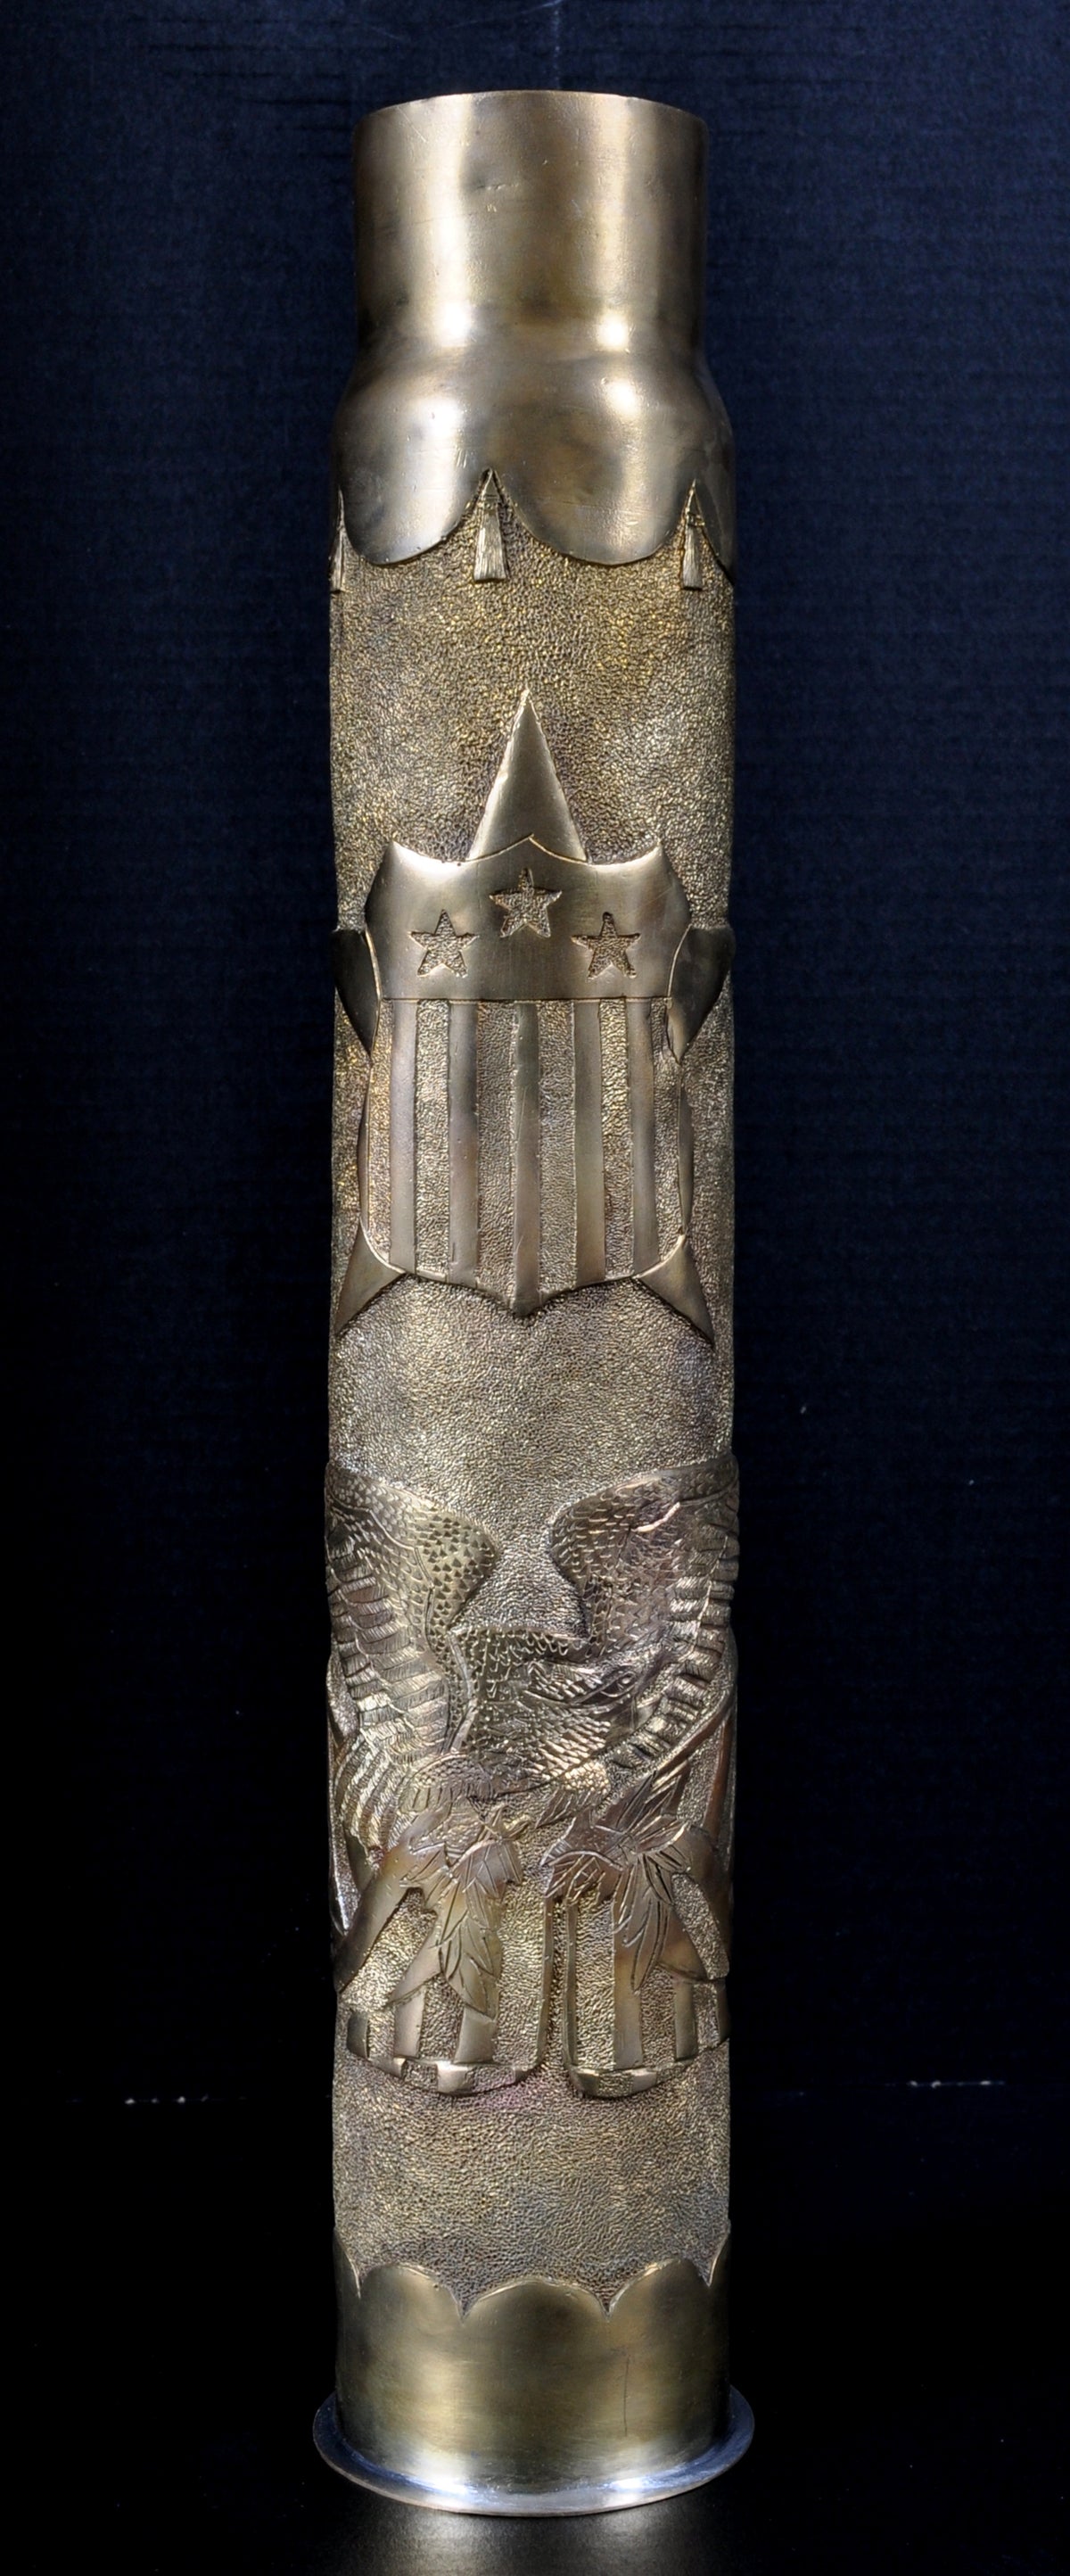 Antique US Navy Artillery Shell/Trench Art From Spanish American War, Circa 1898